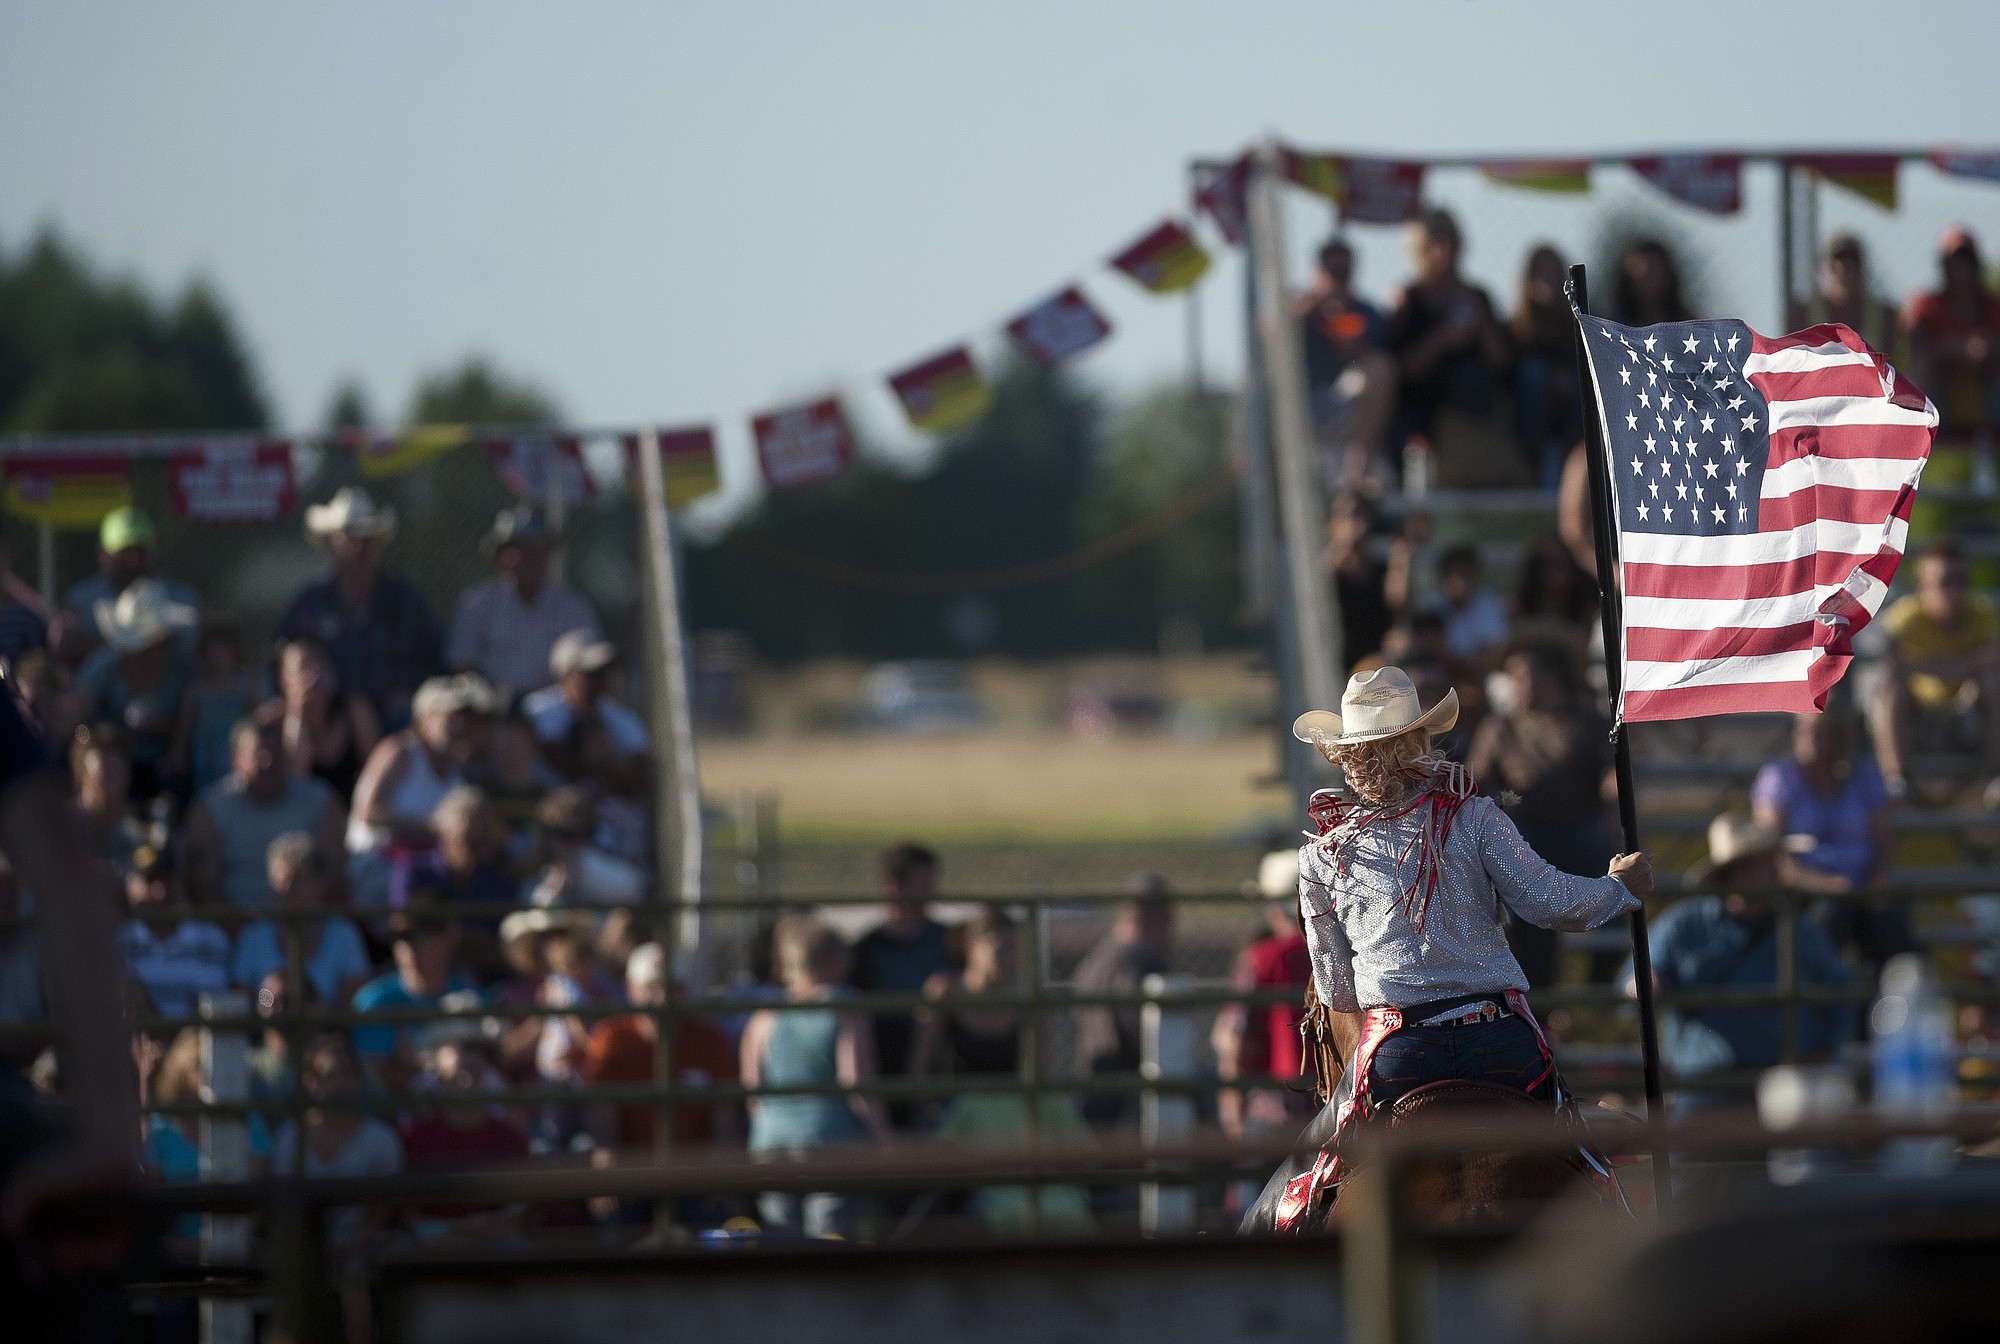 The final night of the 44th annual Vancouver Rodeo is tonight at the Clark County Saddle Club.